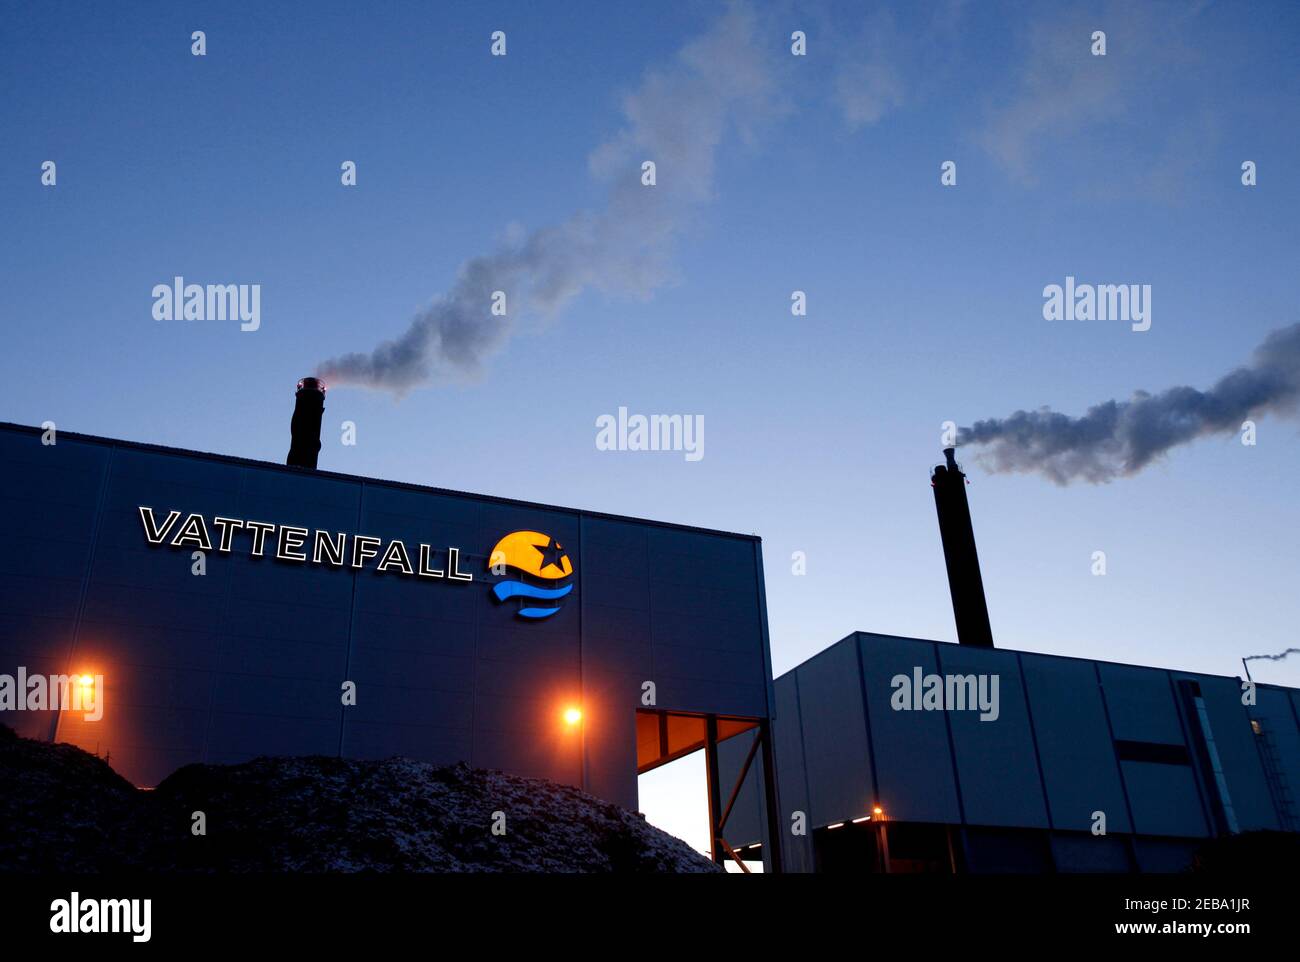 MOTALA, SWEDEN- 18 DECEMBER 2009: Vattenfall's district heating plant in Motala. Stock Photo